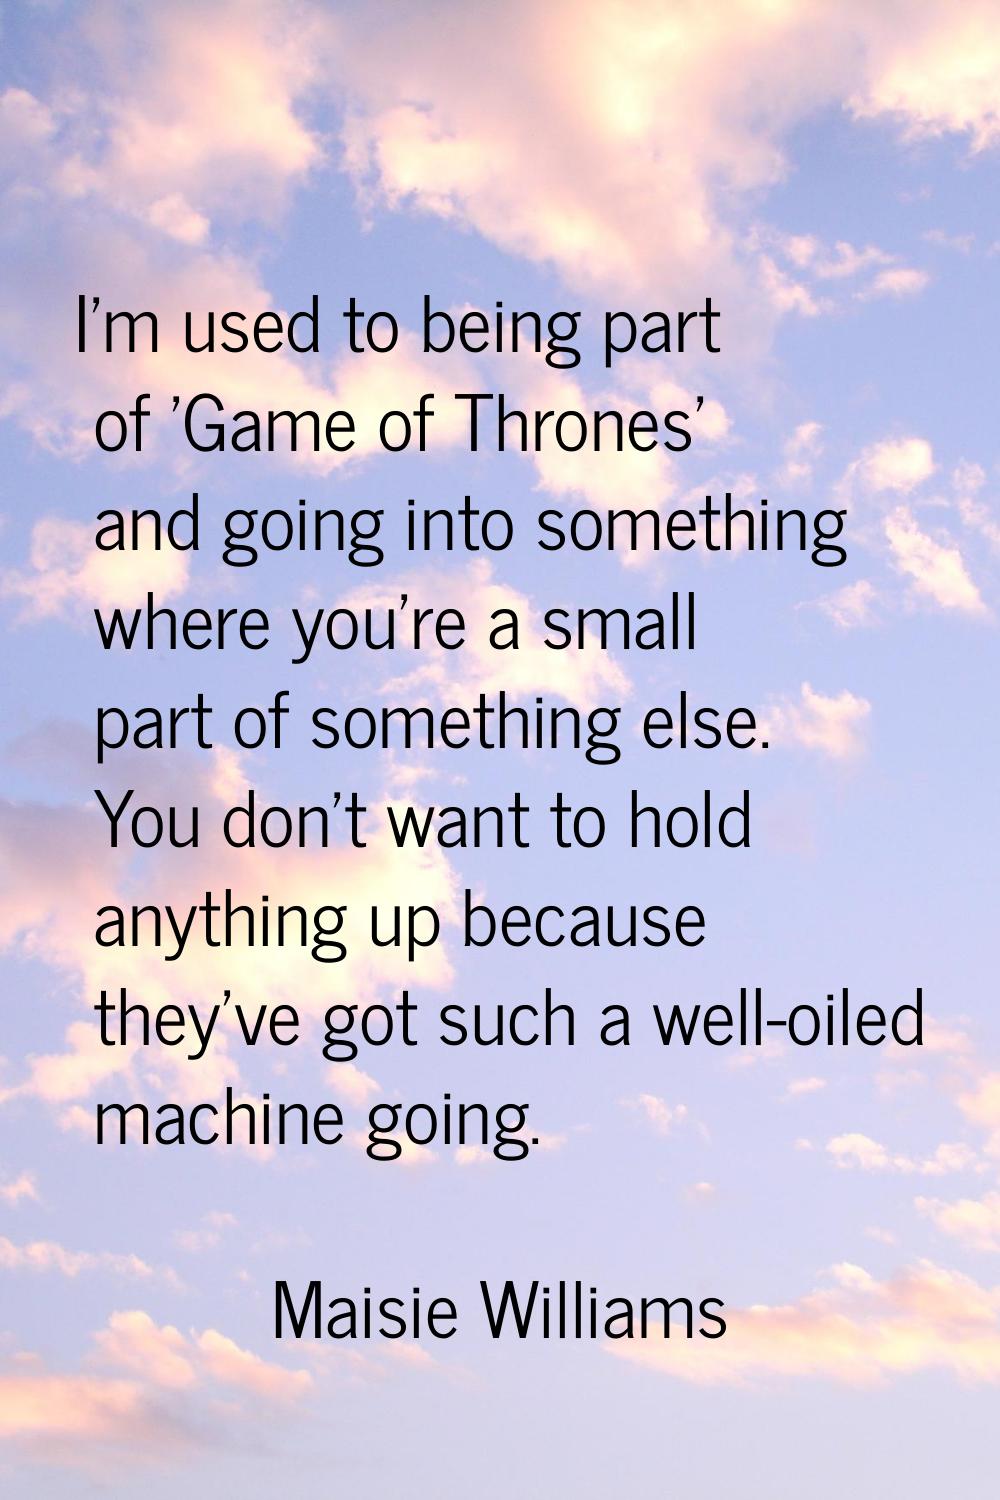 I'm used to being part of 'Game of Thrones' and going into something where you're a small part of s